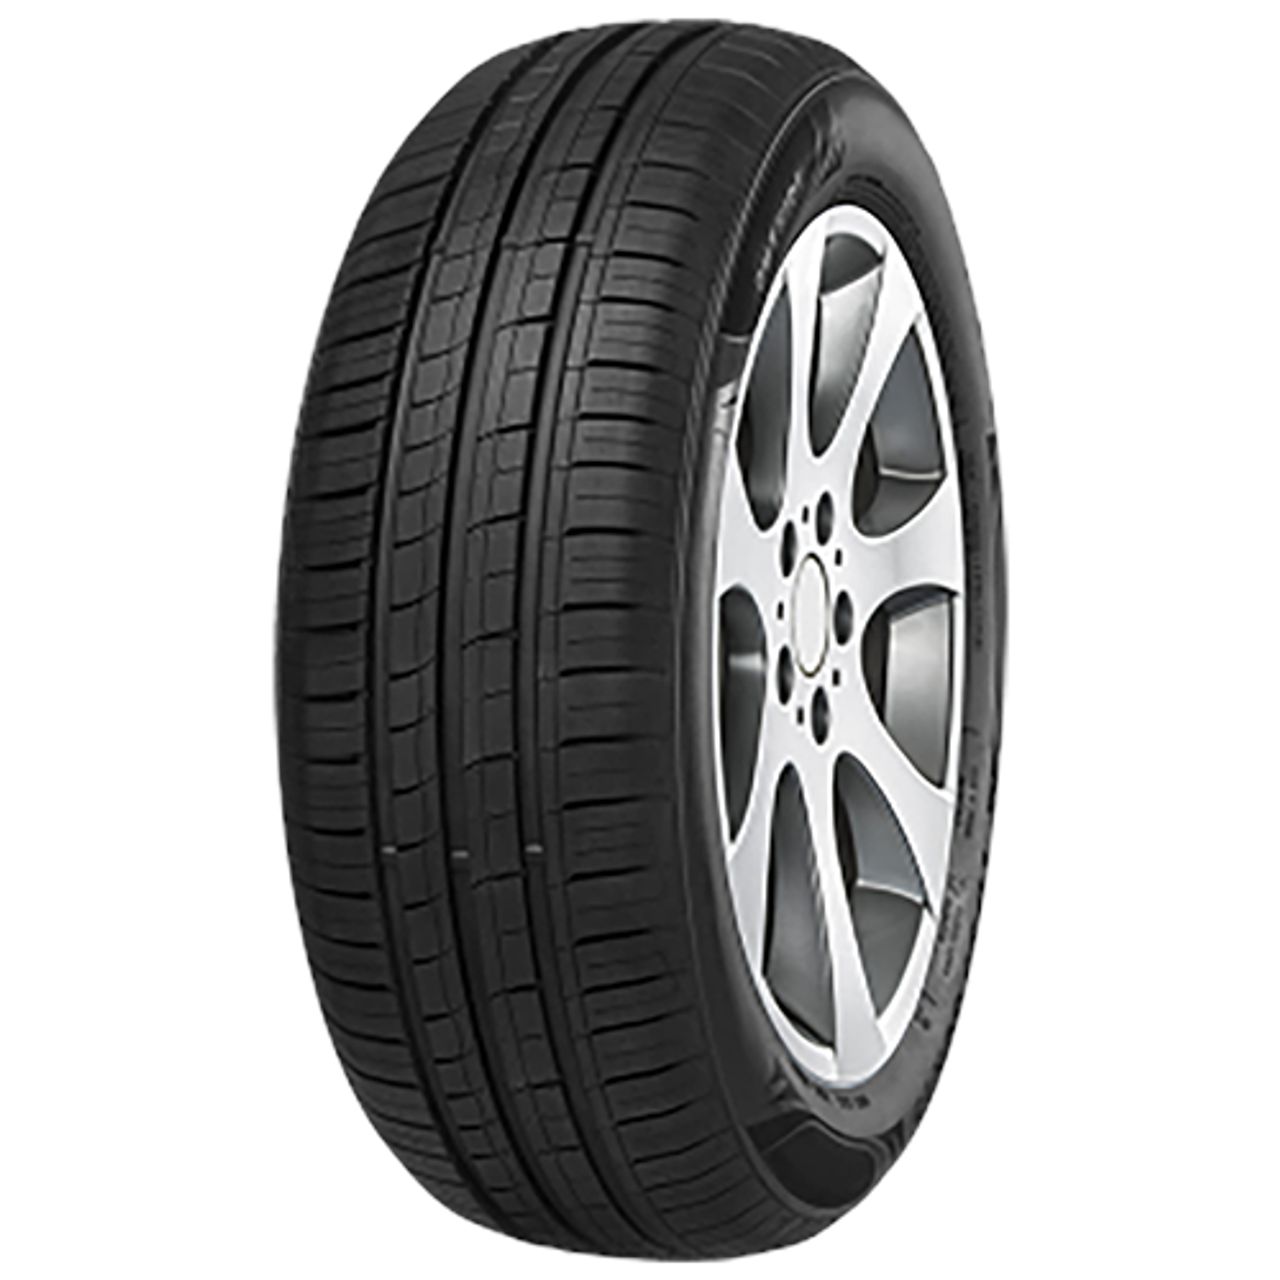 IMPERIAL ECODRIVER 4 175/80R14 88H BSW